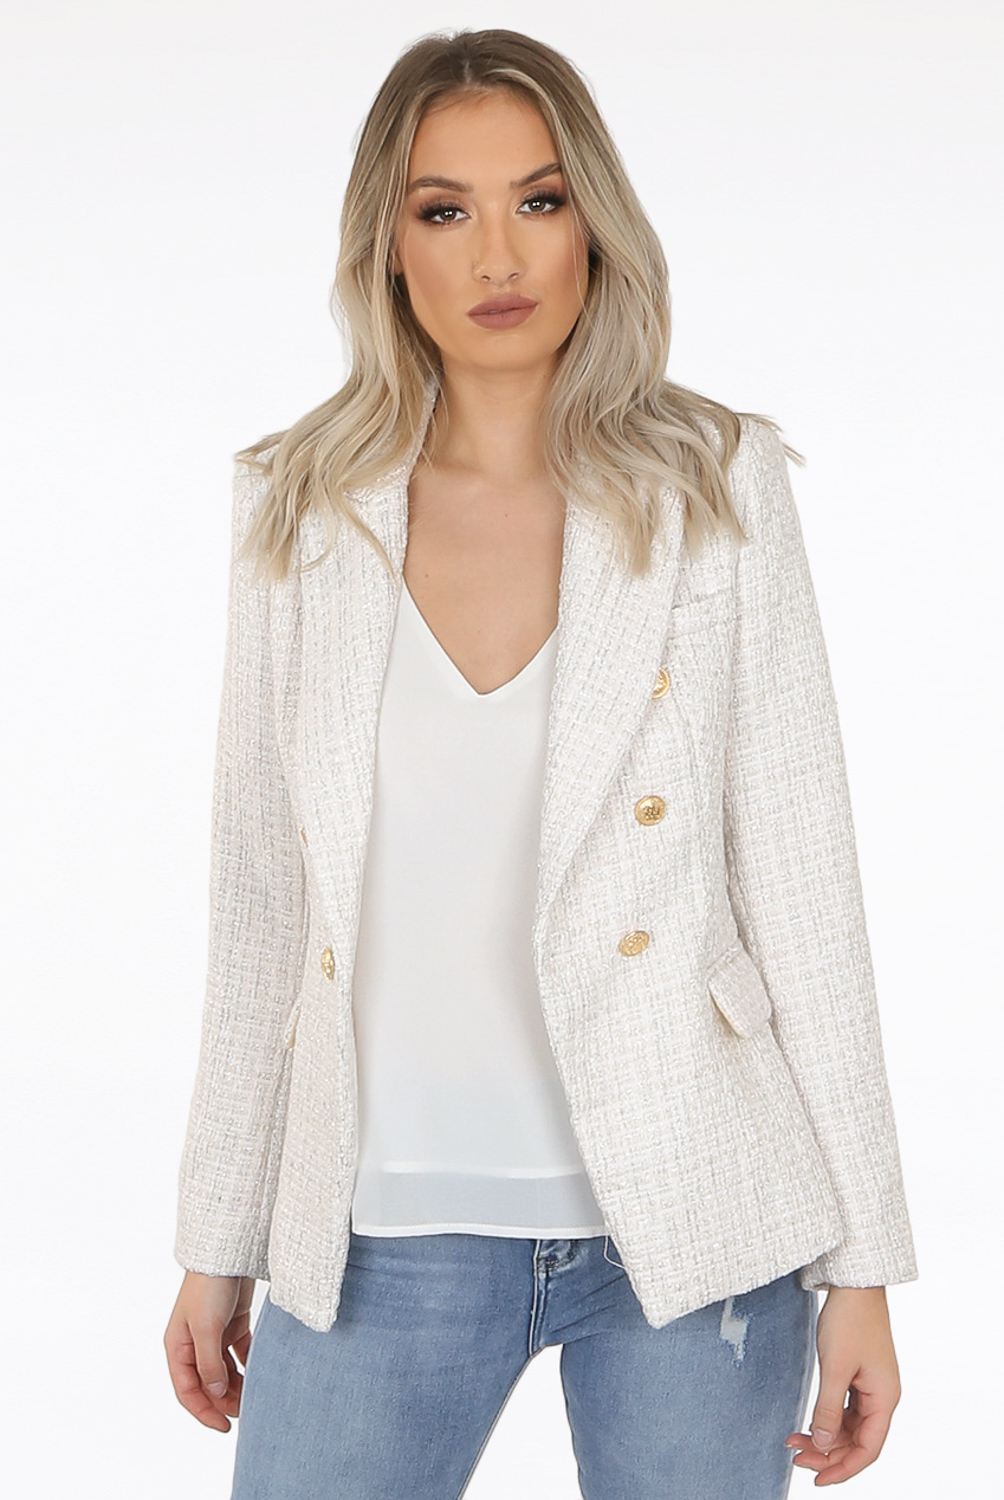 Two Tone Thread Double Breast Blazers - Buy Fashion Wholesale in The UK